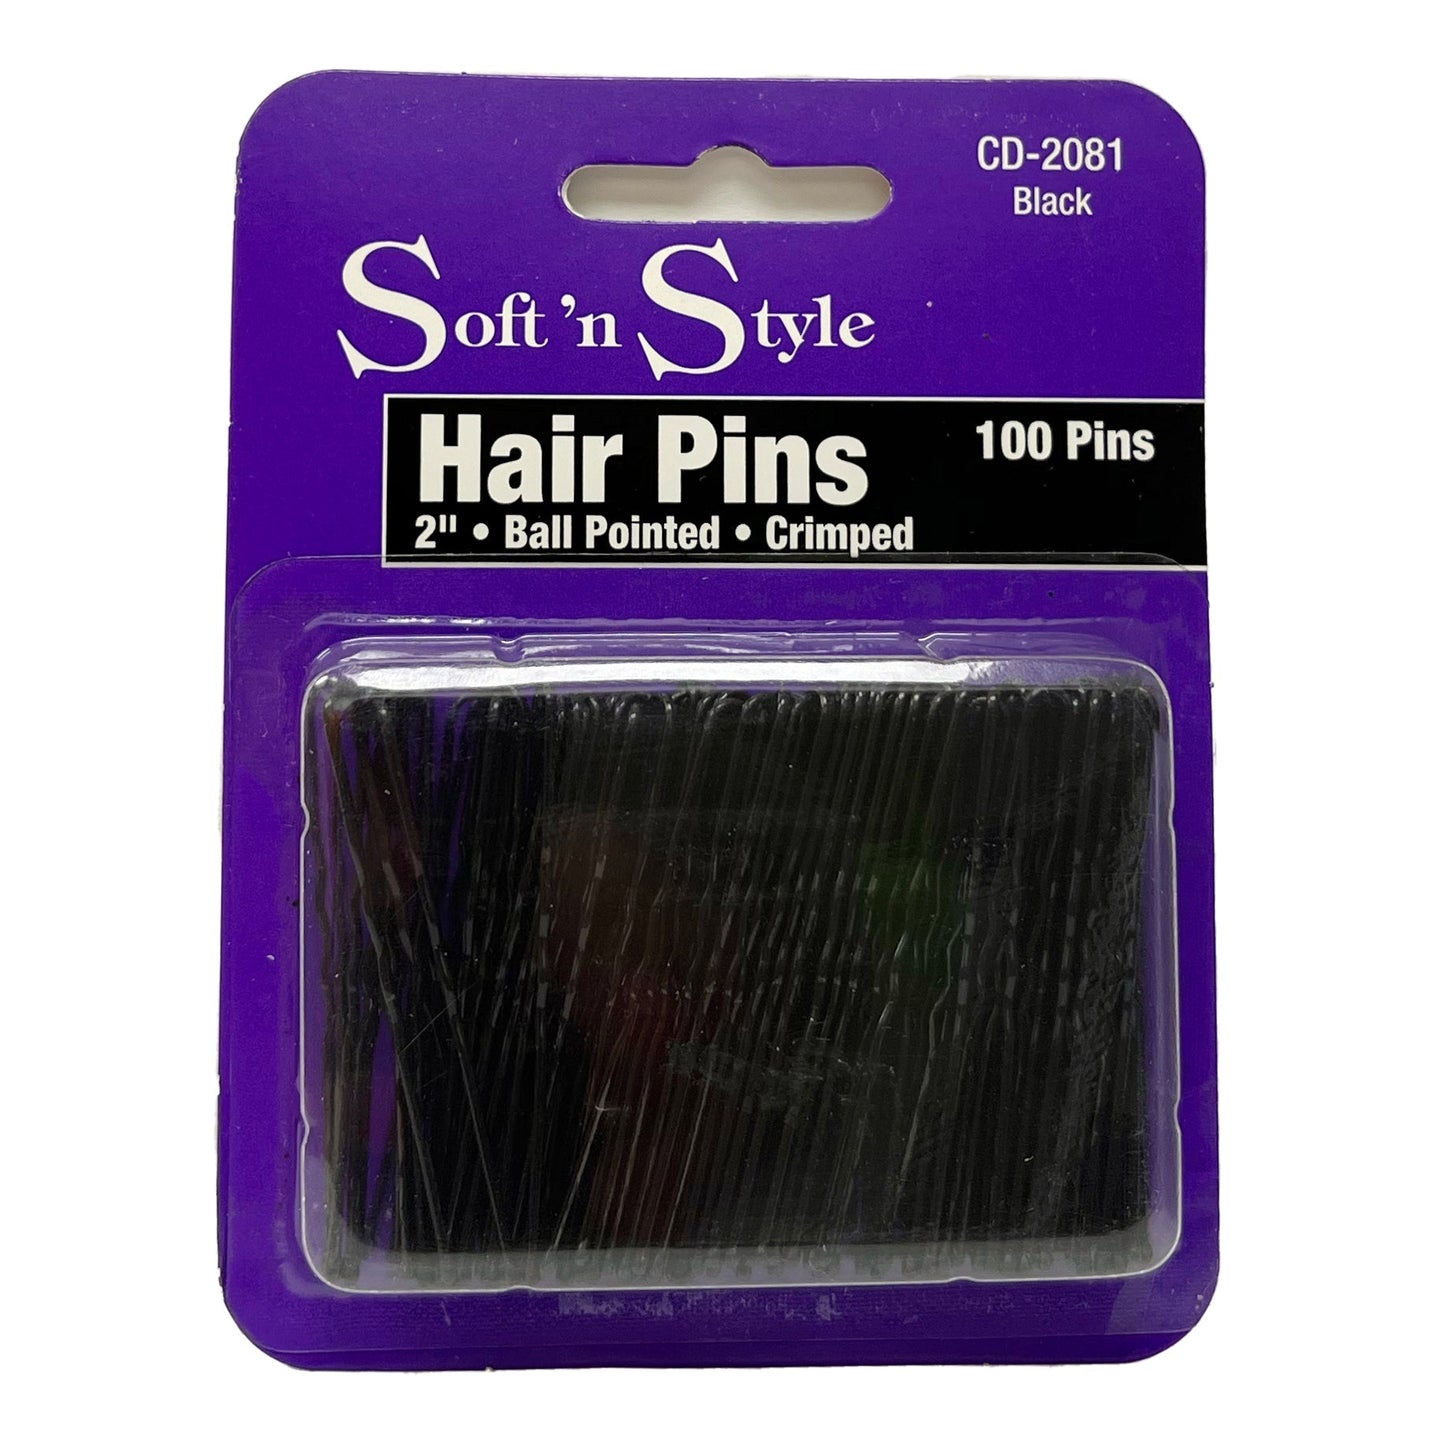 100 Bobby Pins | 2" | Ball Pointed | Crimped | SOFT N STYLE HAIR COLORING ACCESSORIES SOFT N STYLE Black 